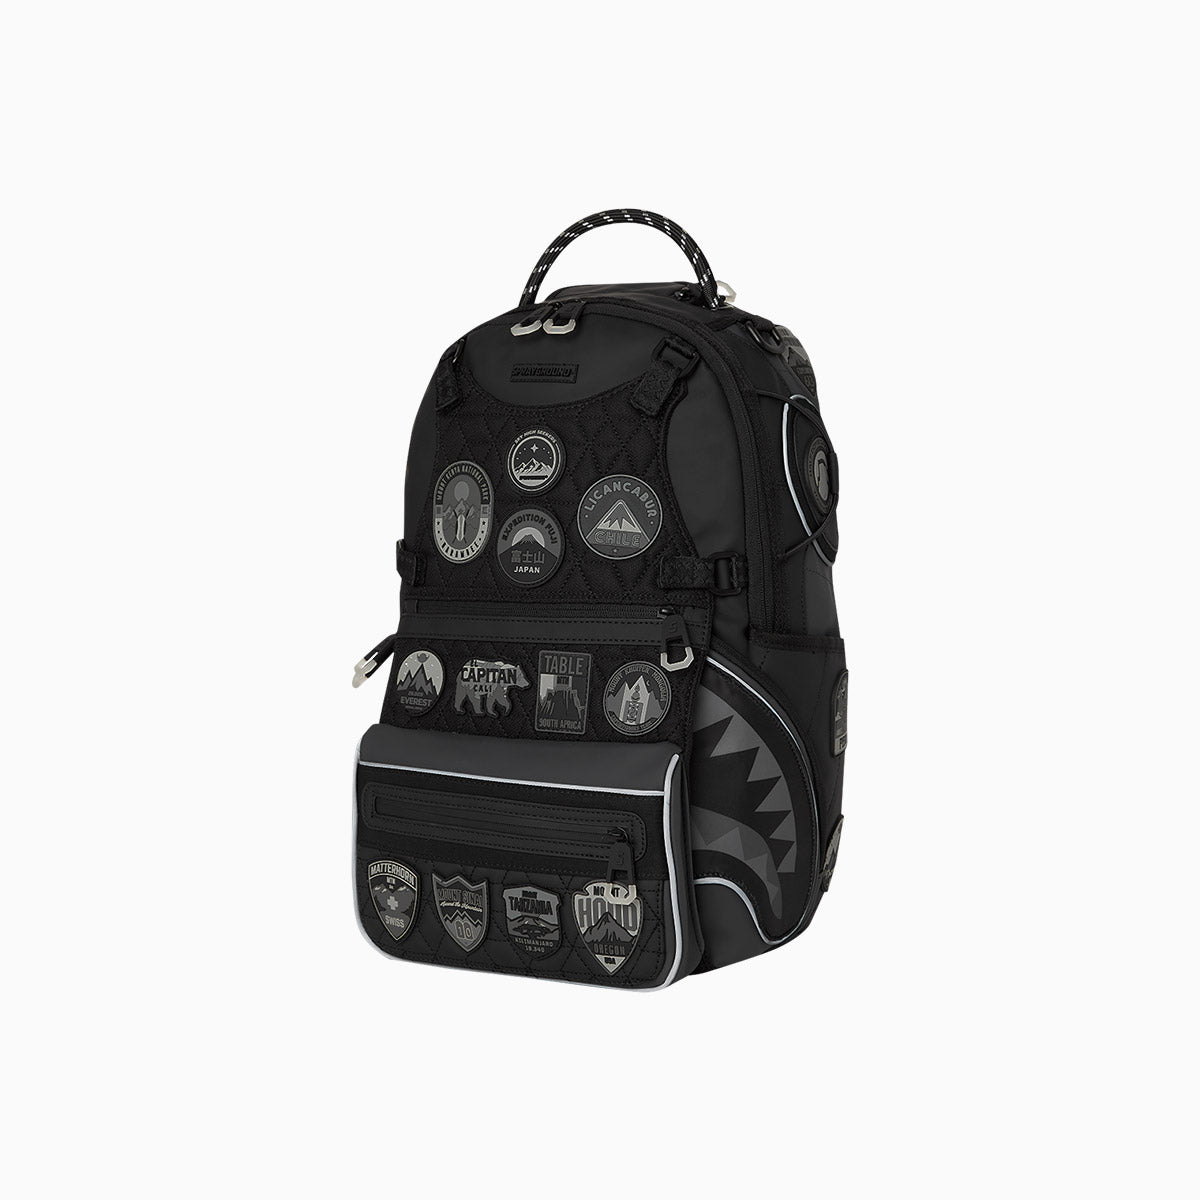 spray-ground-the-global-expedition-nightzone-backpack-b5744-blk